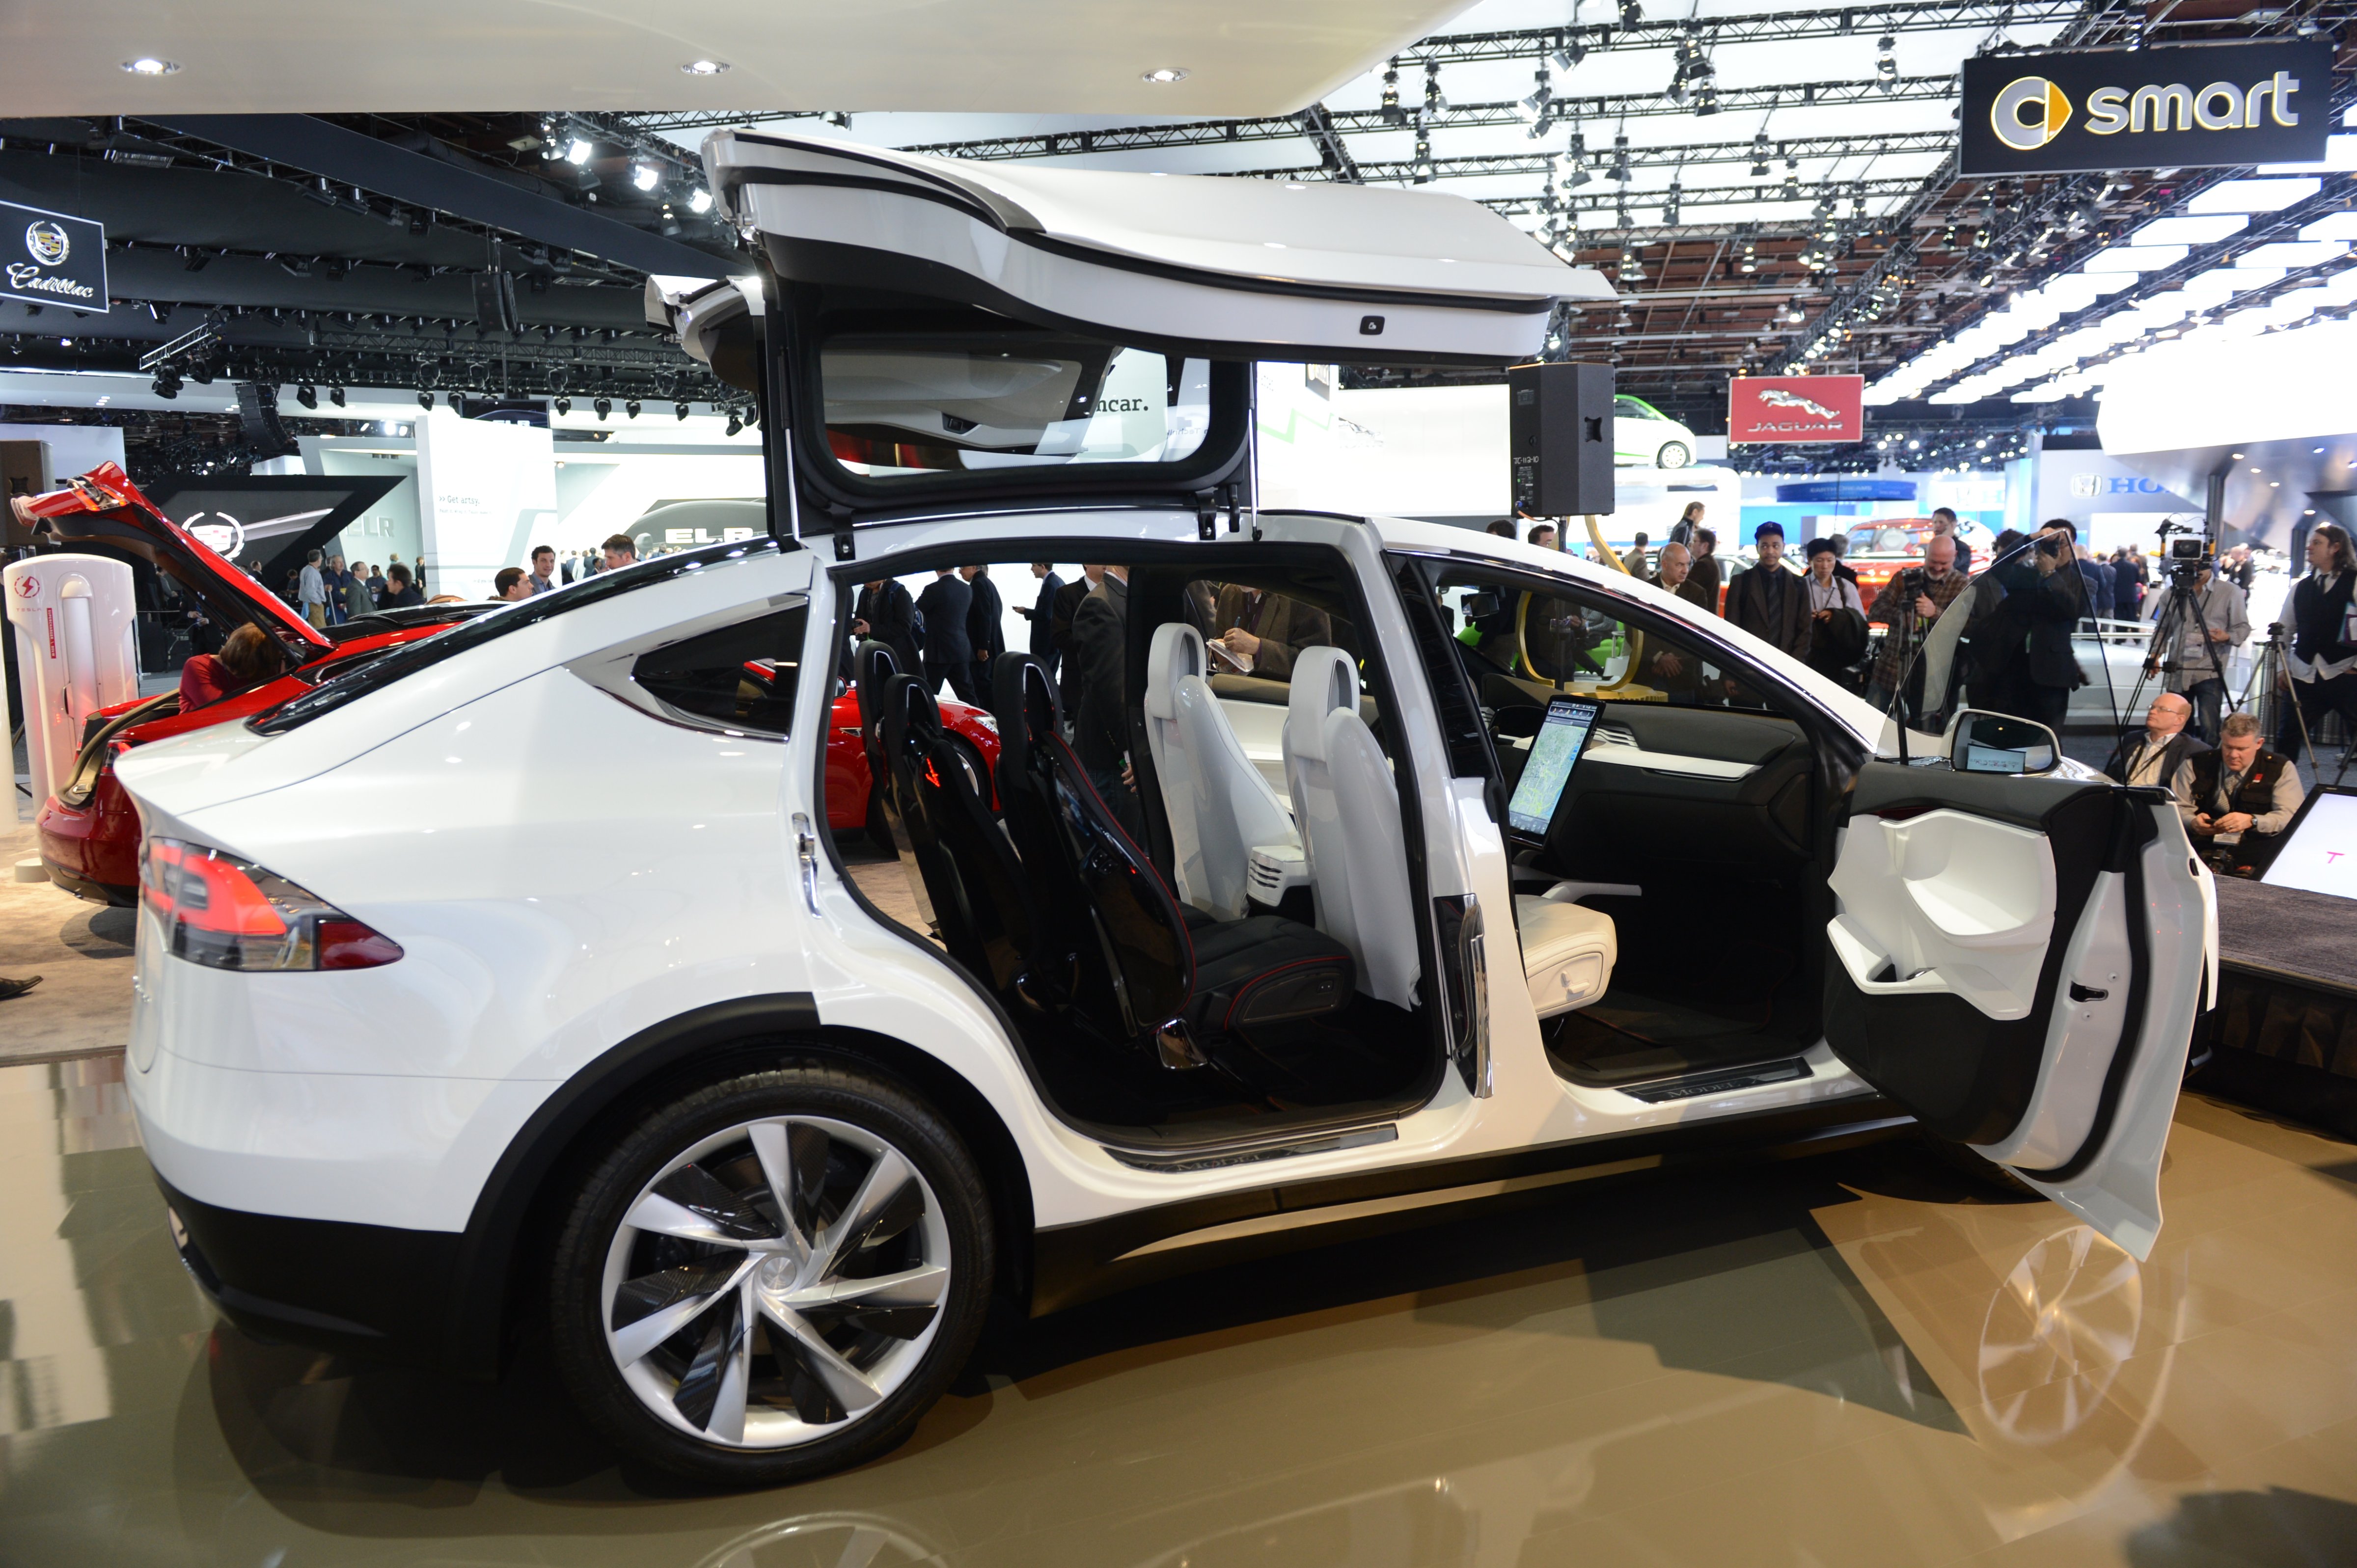 The Tesla Model X is introduced at the 2013 North American International Auto Show . (STAN HONDA—AFP/Getty Images)